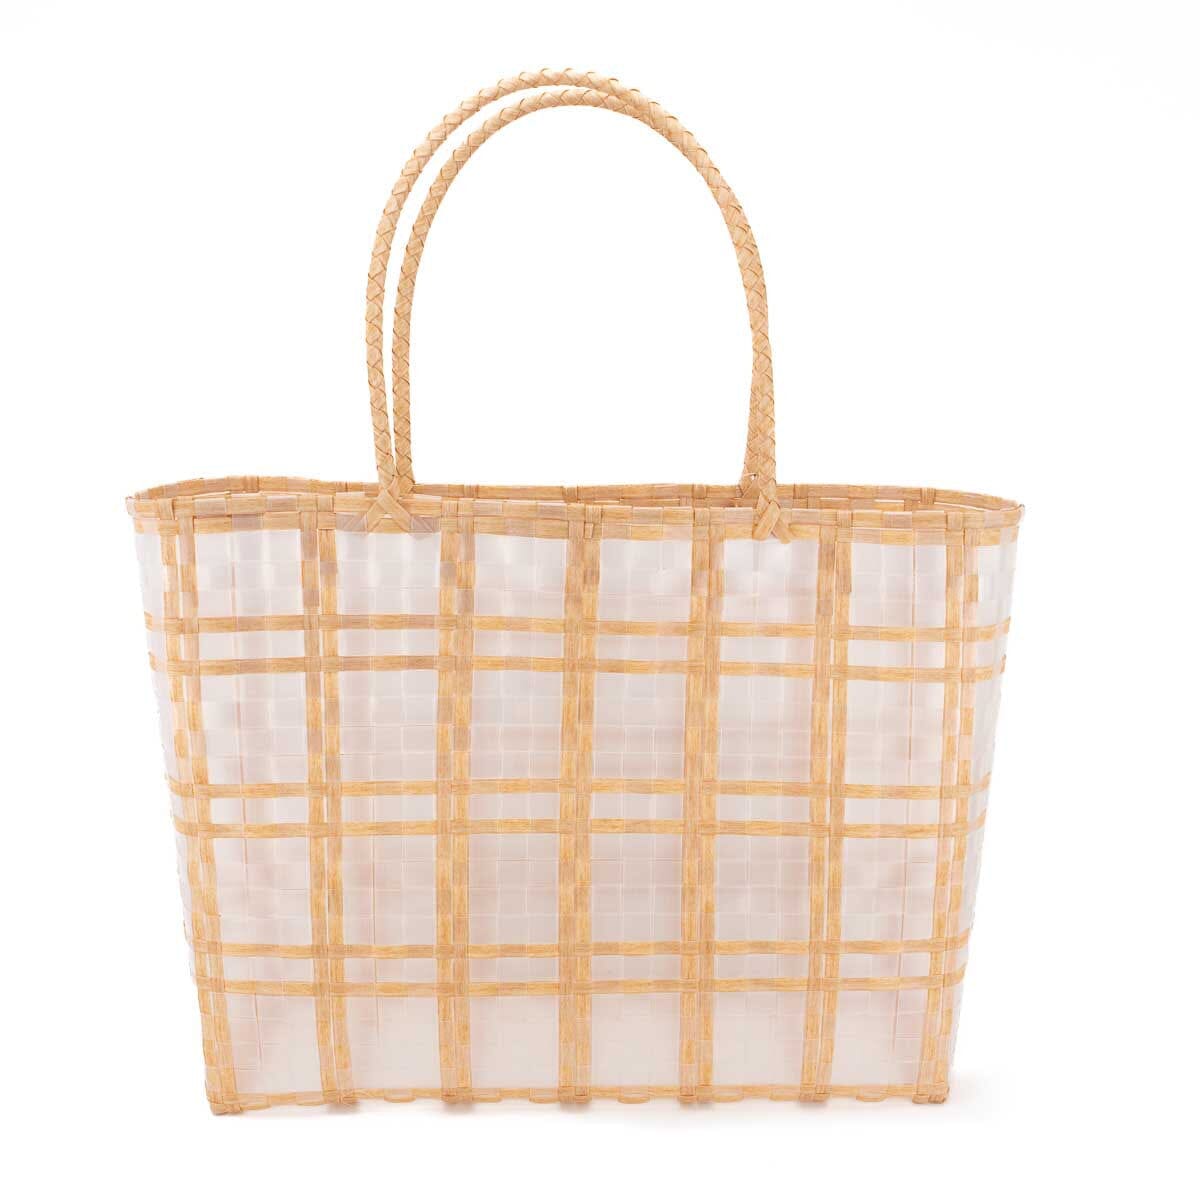 Keone Woven Beach Tote in Light Natural The Royal Standard 